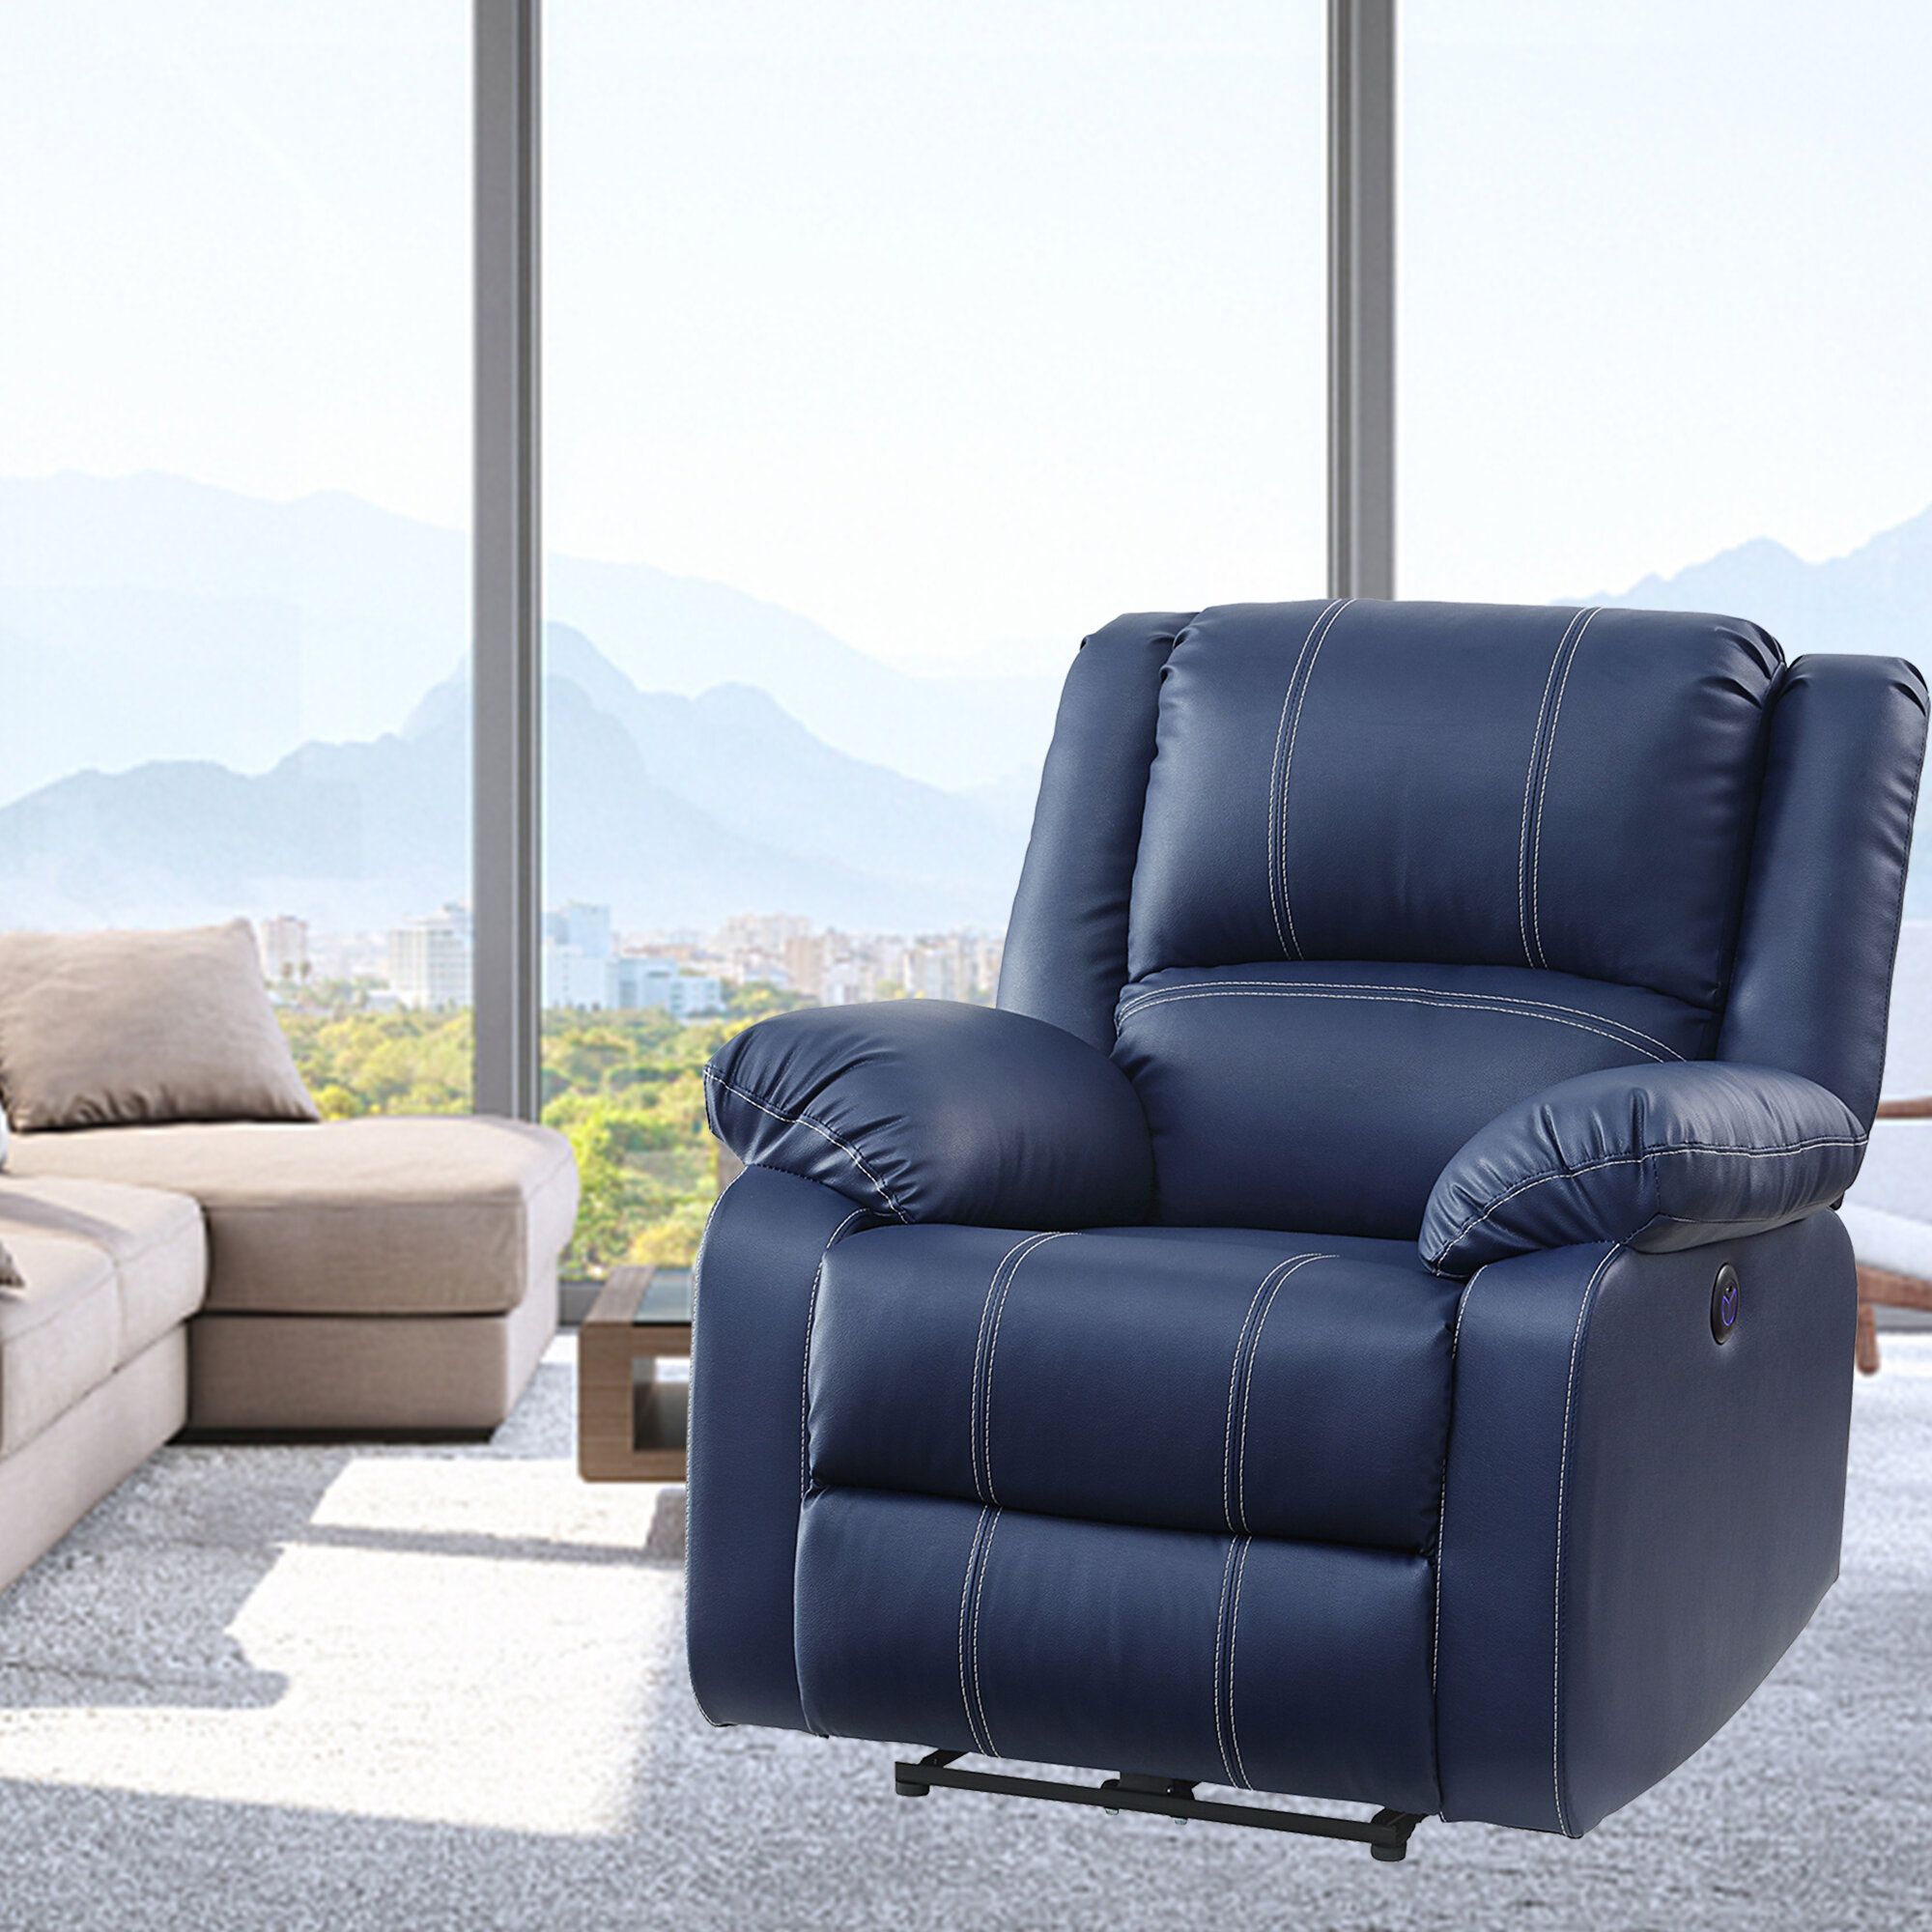 Details about   Black PU Leather Recliner for Living Room Bedroom Home Theater 